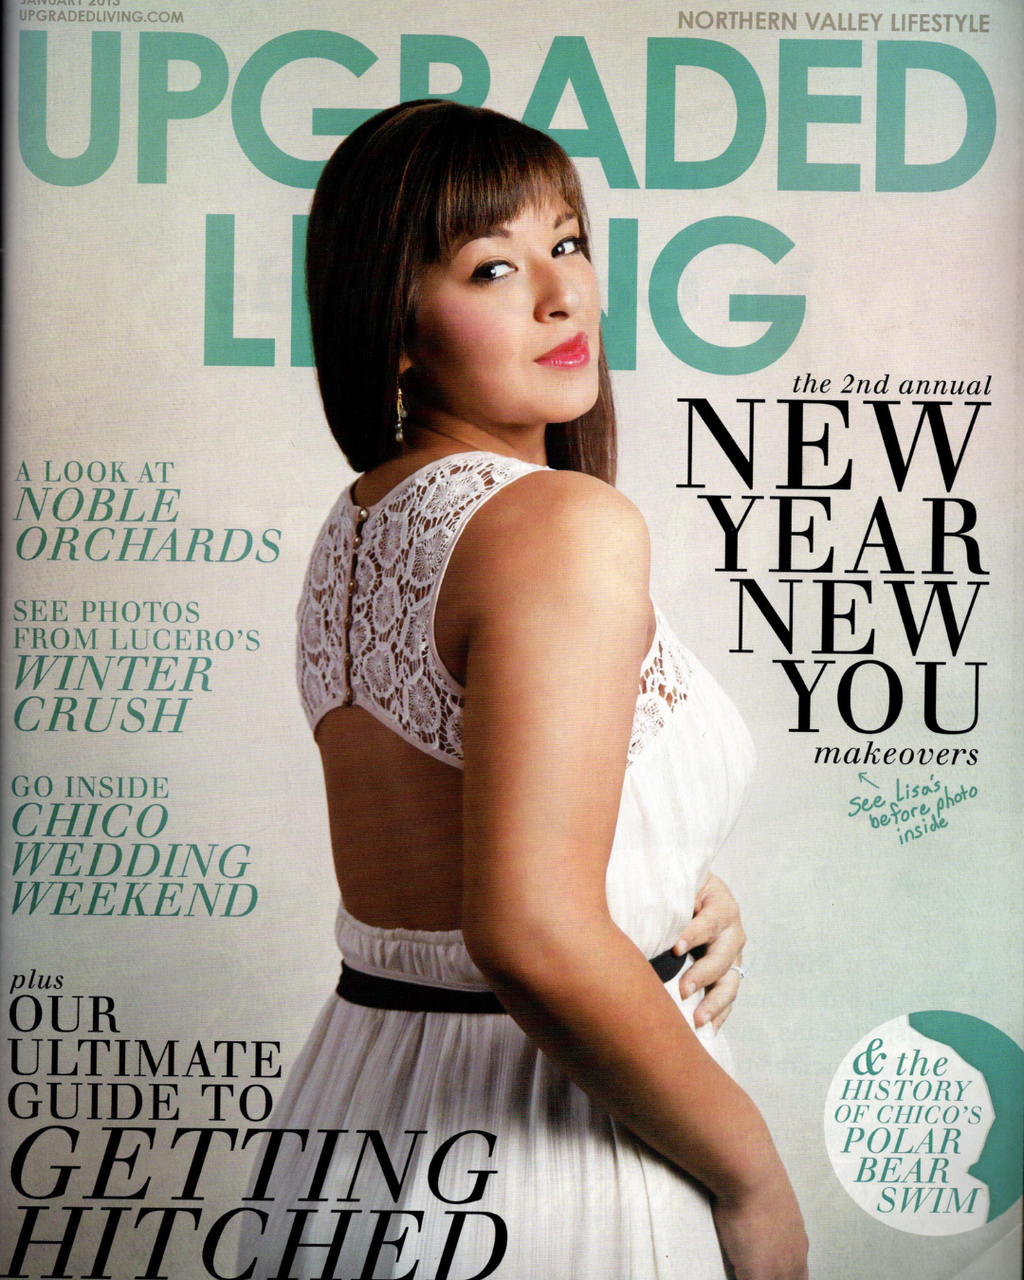 Geralyn Sheridan Designs Featuring at Upgraded Living Magazine Cover